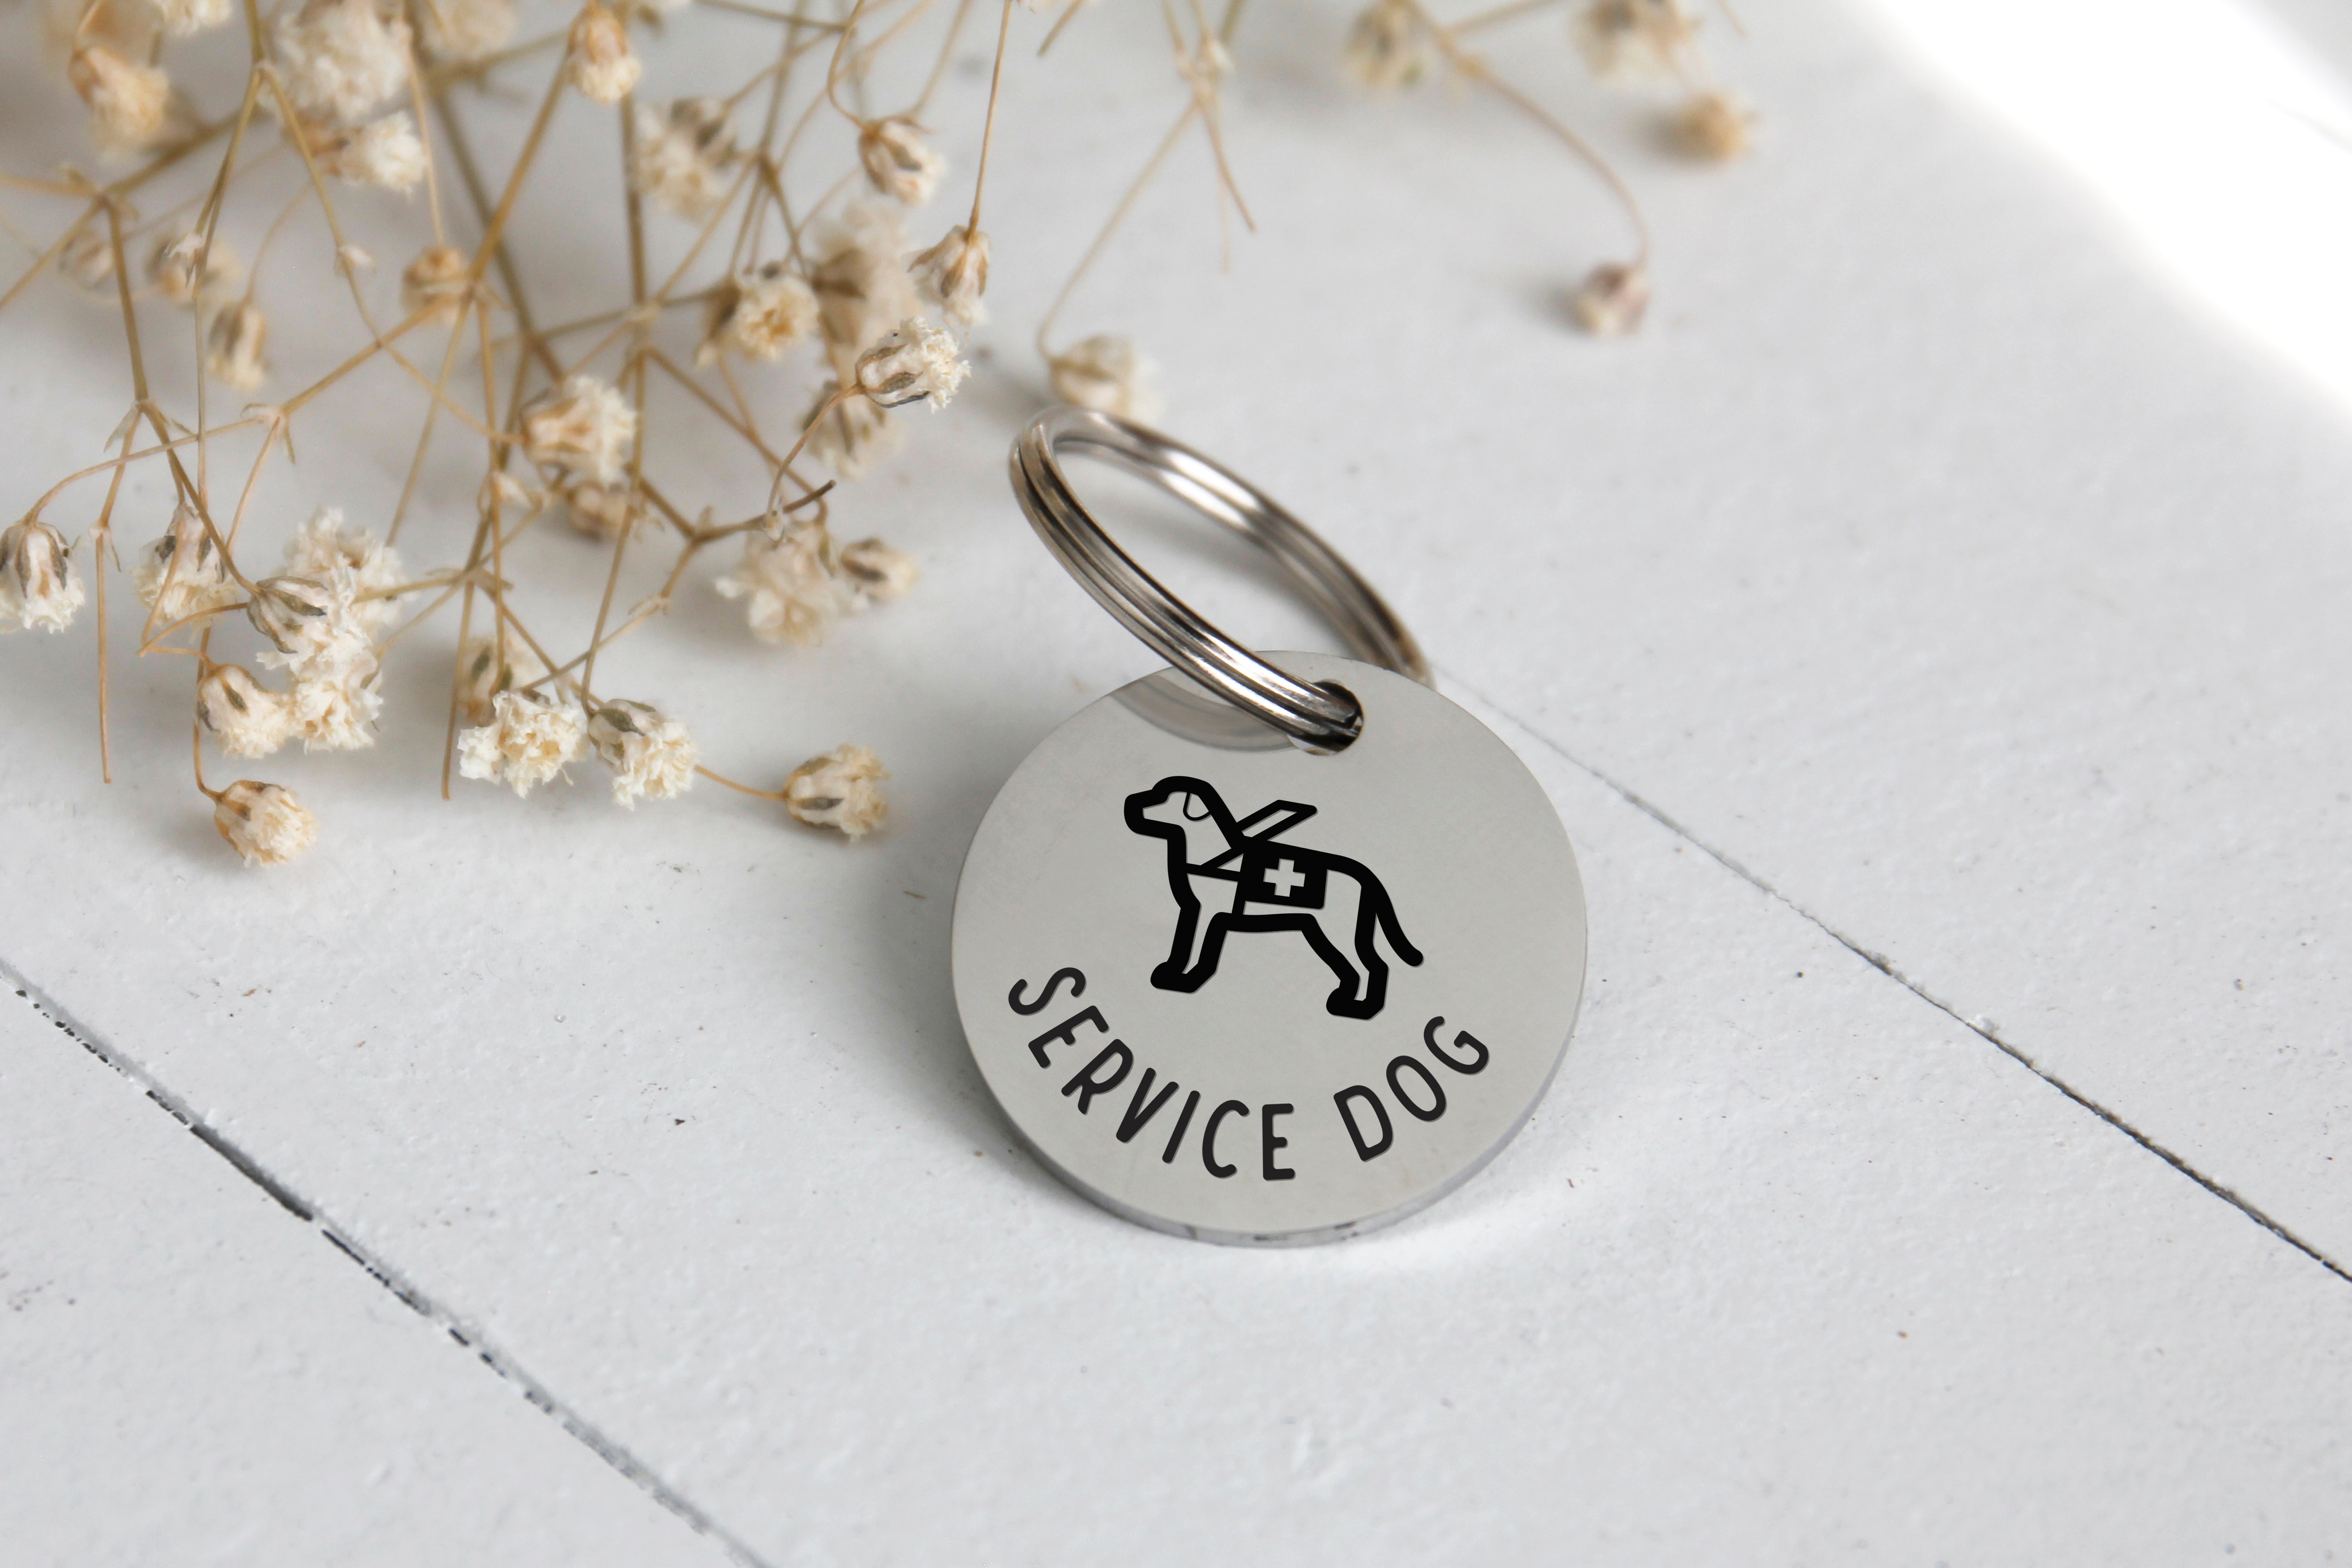 Service Dog Stainless Steel Pet ID Tag